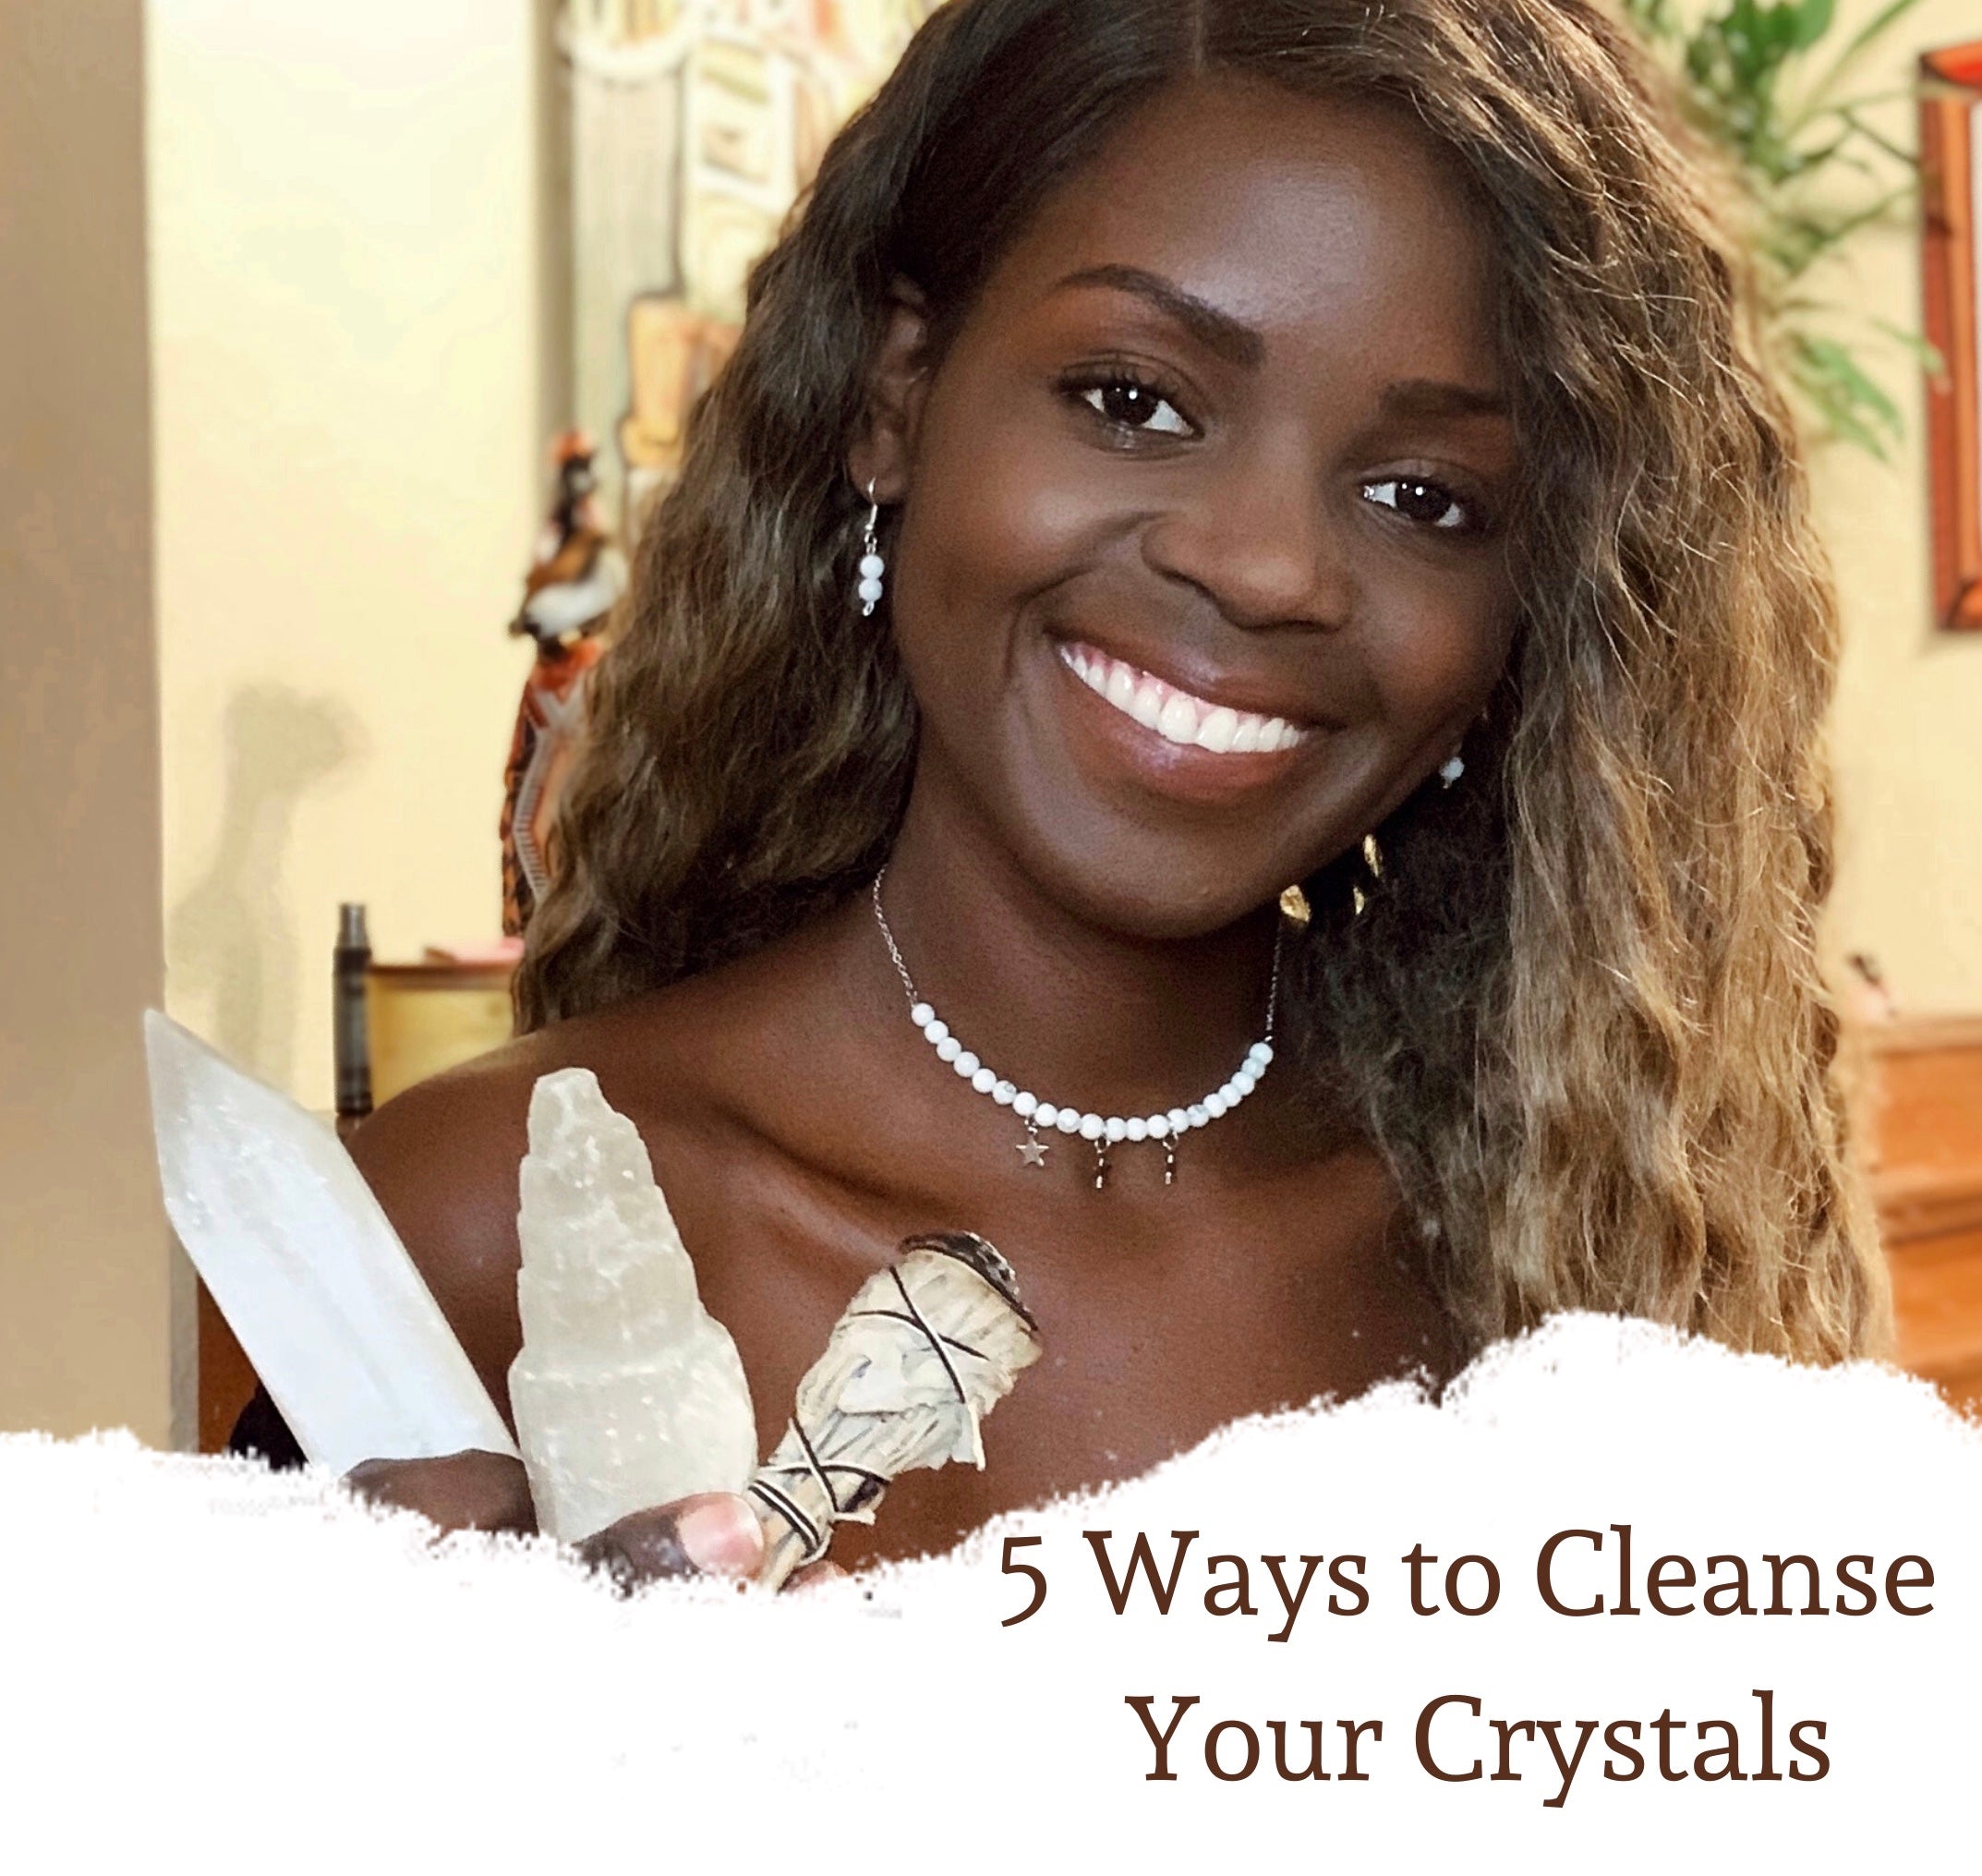 5 Ways to Cleanse Your Crystals